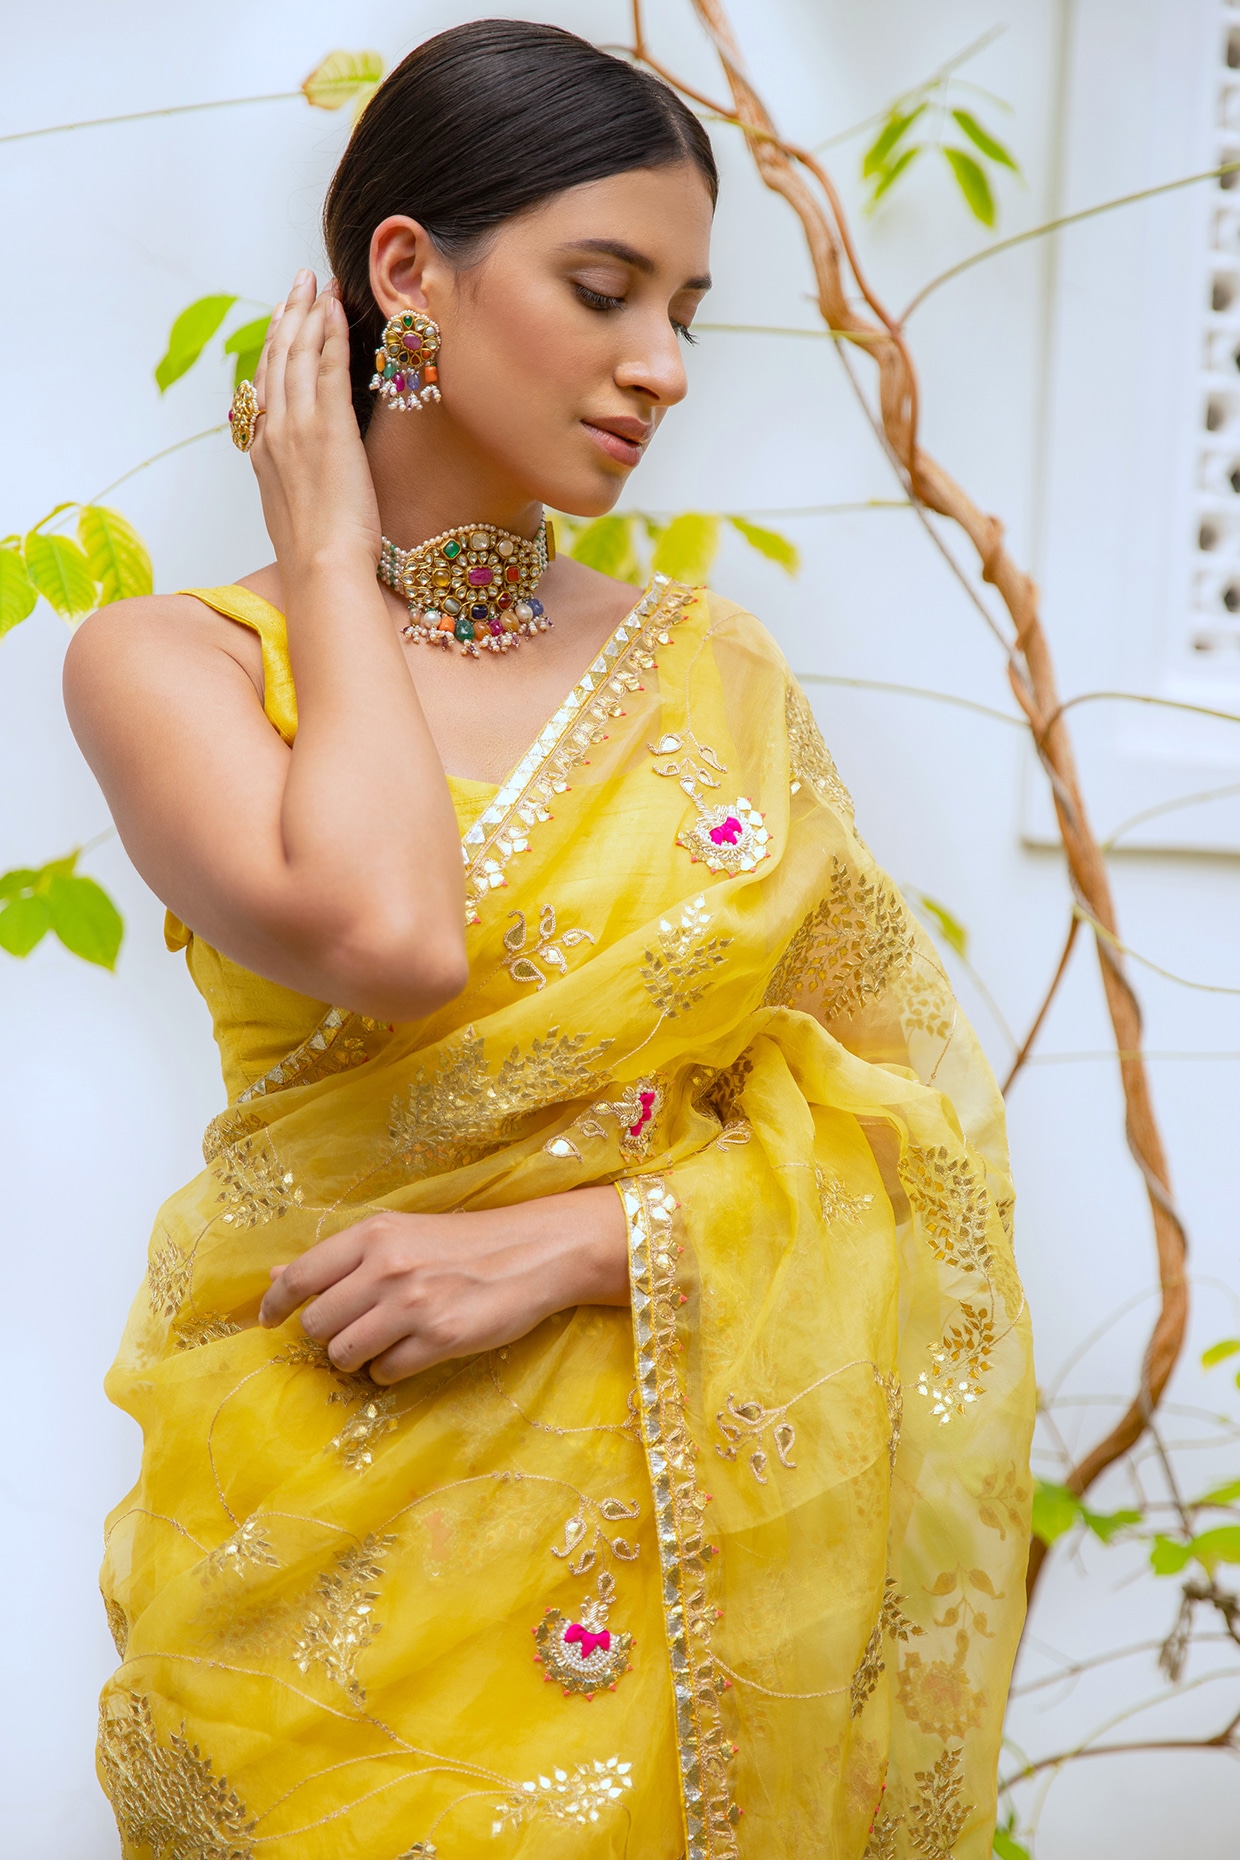 Free Photos - A South Asian Woman Wearing Traditional Attire, Likely A Saree,  And A Yellow Blouse. She Is Adorned With Gold Jewelry, Showcasing The  Beauty Of Her Culture And Heritage. The